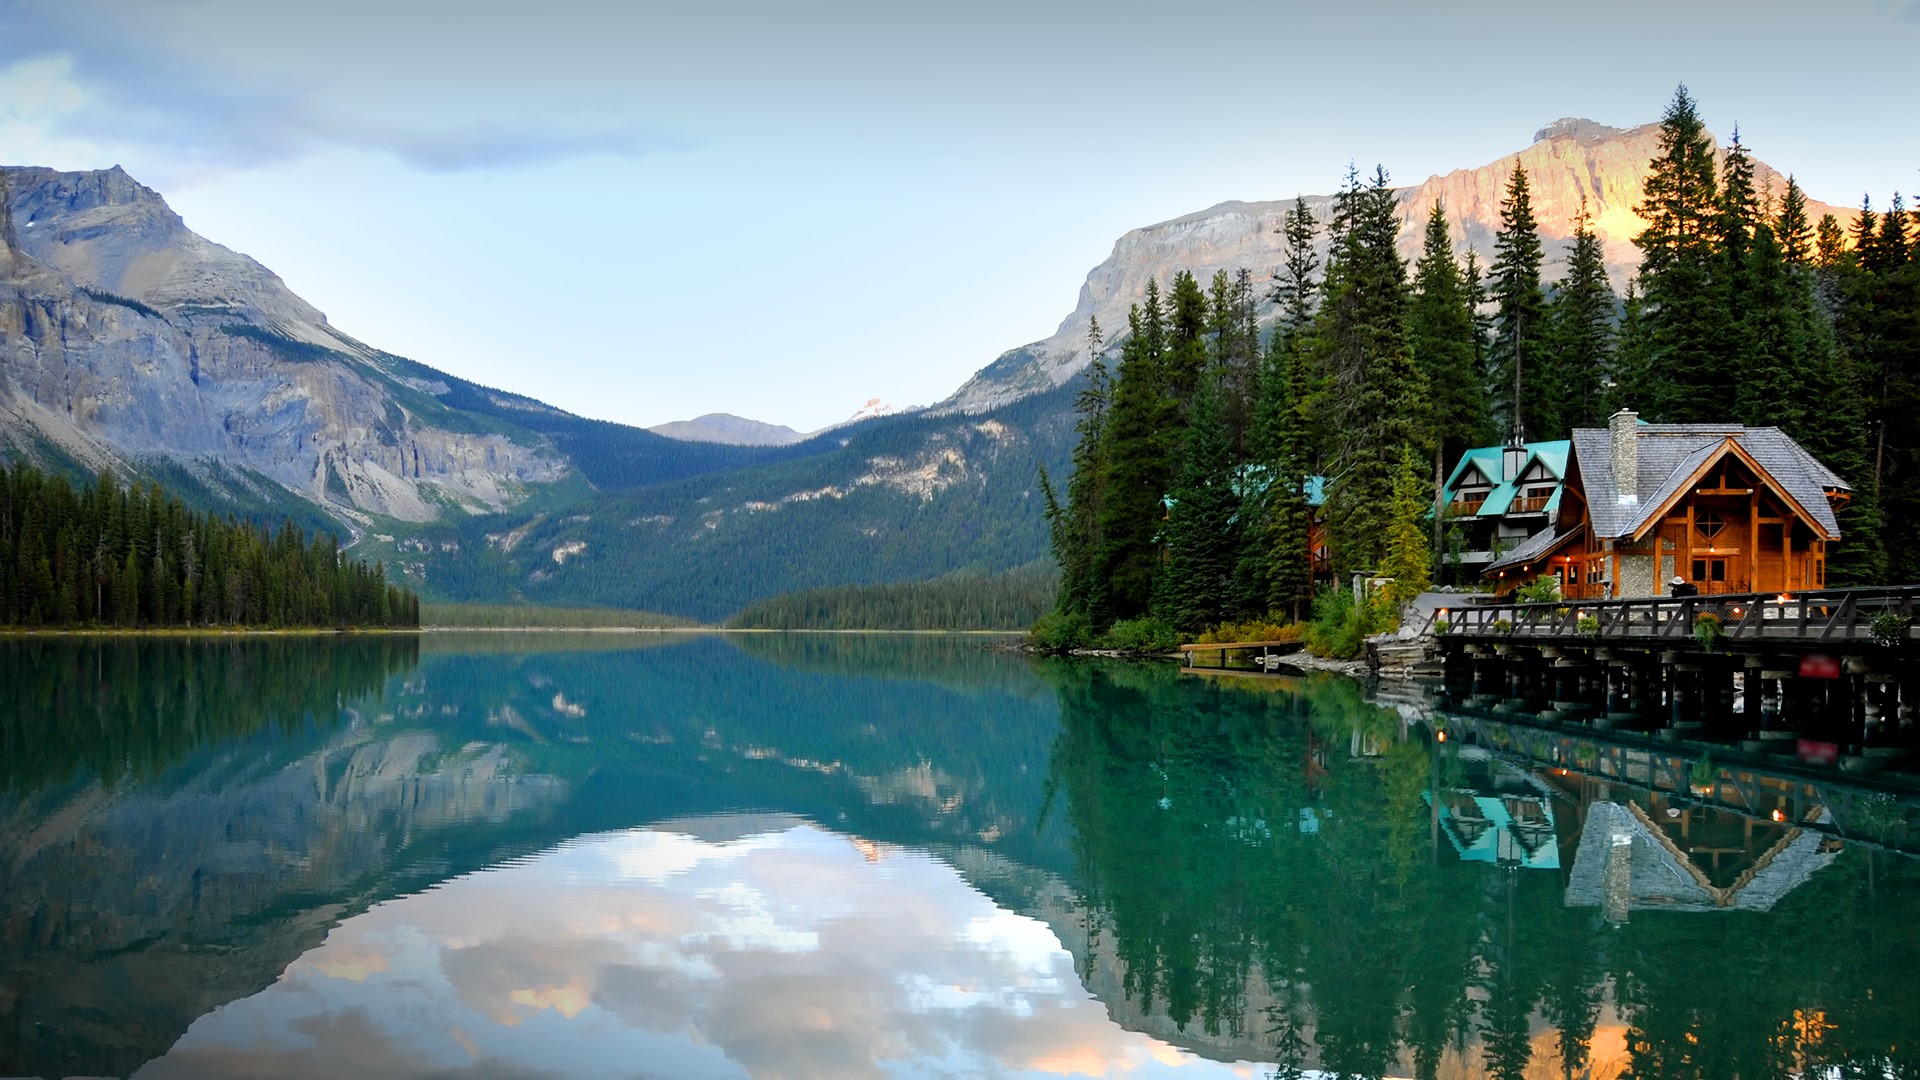 General 1920x1080 reflection landscape nature lake house trees mountains sky Canada British Columbia Yoho National Park Emerald Lake British Columbia